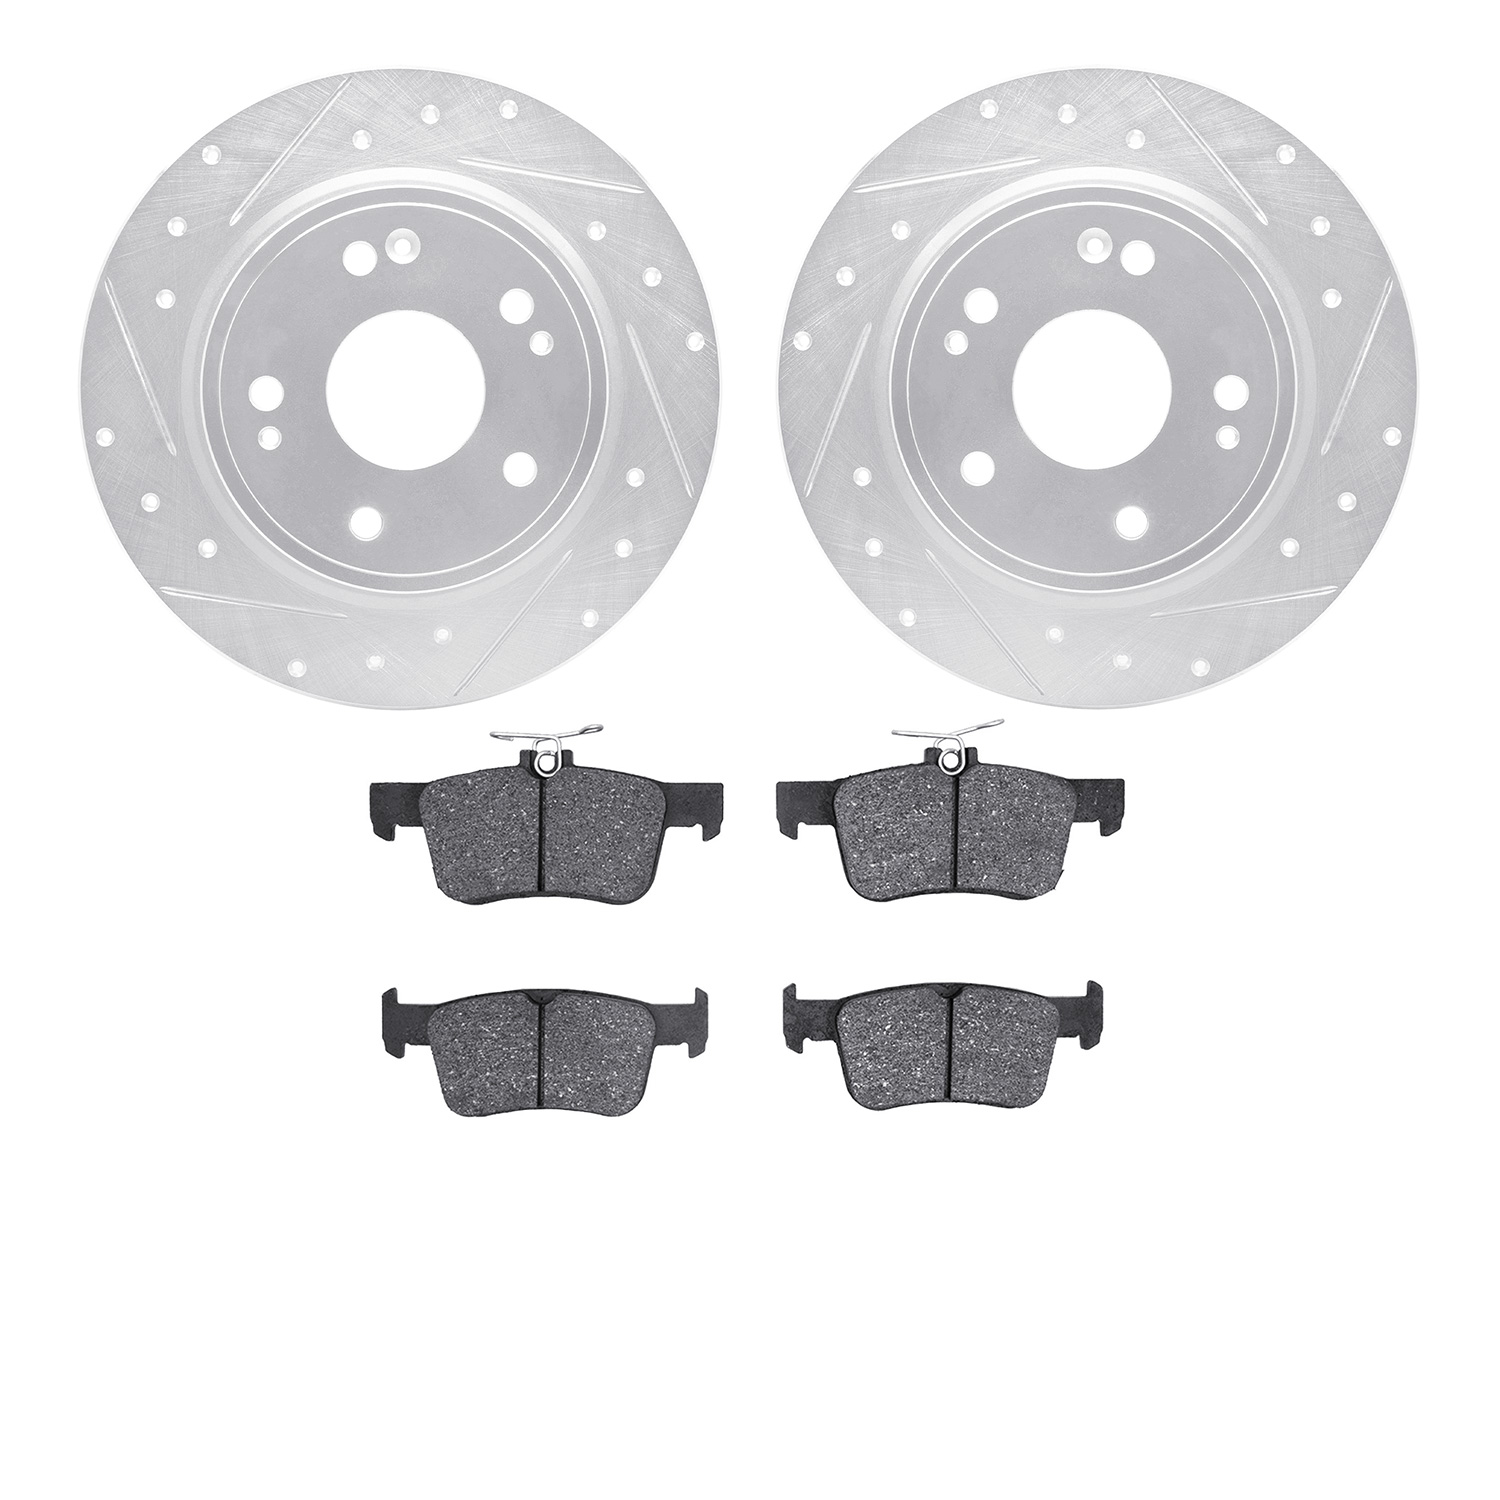 7502-59123 Drilled/Slotted Brake Rotors w/5000 Advanced Brake Pads Kit [Silver], Fits Select Acura/Honda, Position: Rear